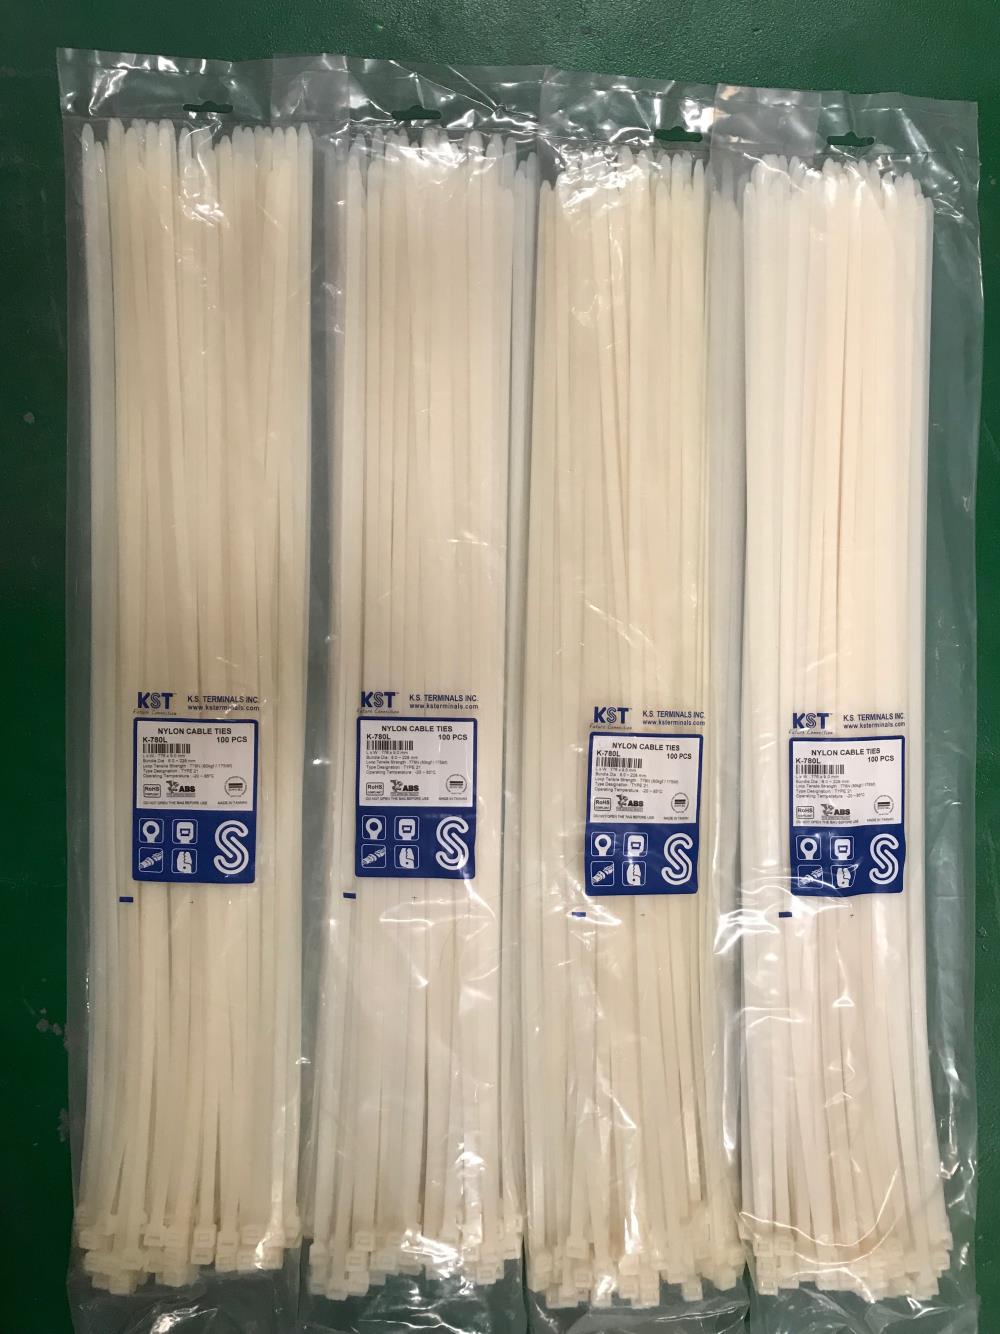 K-1220L cable ties 48" ,CABLE TIES,KST,Materials Handling/Cable Ties